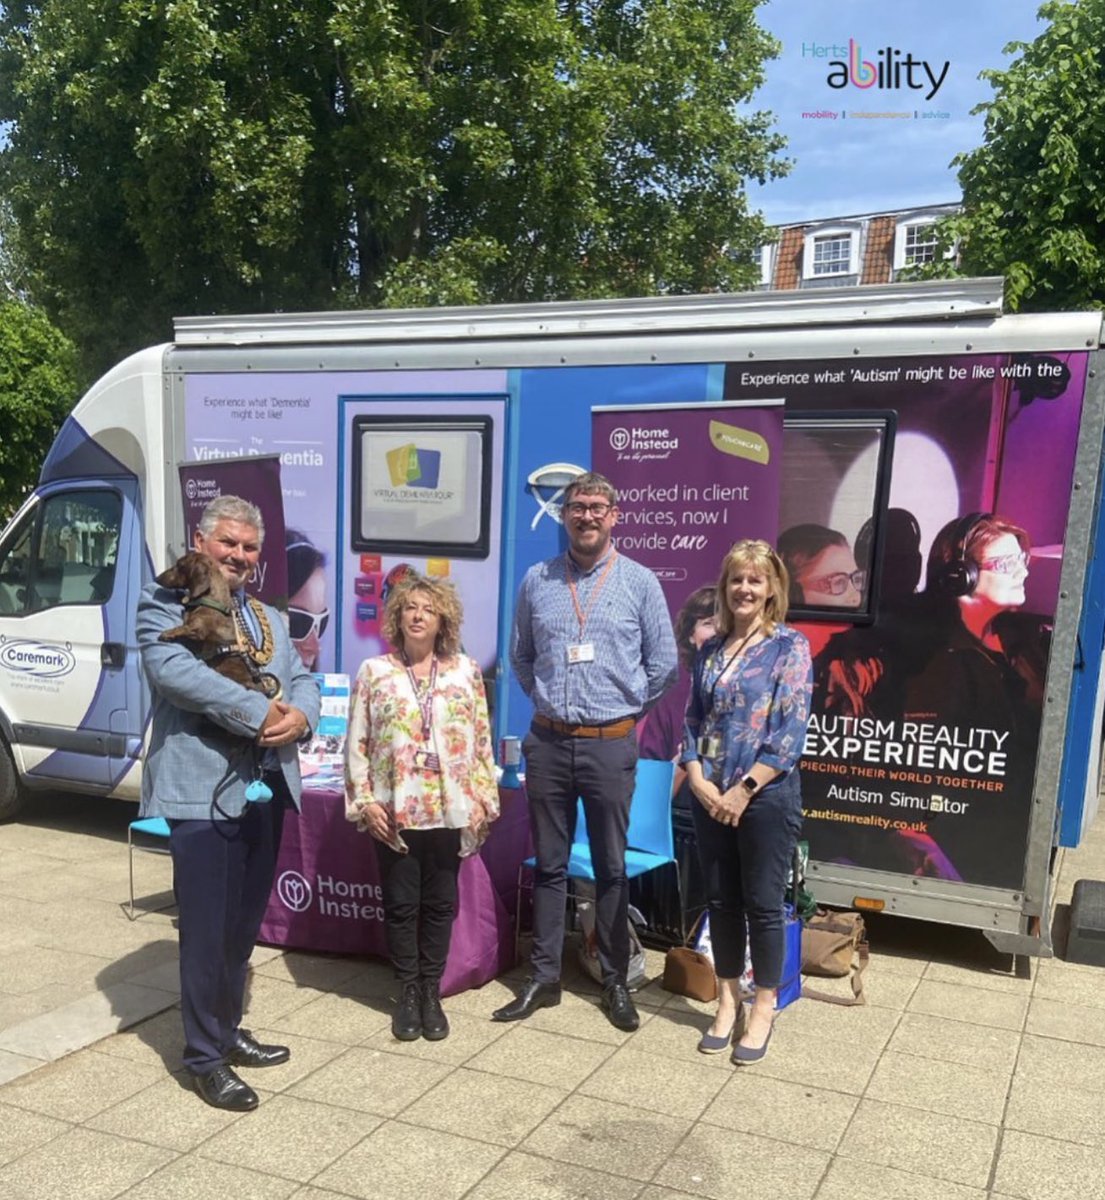 TBT! A sunny hello ahead of #DementiaActionWeek - commencing on Monday 13th May - from the #HowardCentre in #WelwynGardenCity! 😎

Our CEO Sean Lawrence pictured was with Welwyn Mayor Peter Hebden, Councillor Fiona Thompson and Jane Andrews from Home Instead - Welwyn & Hatfield.